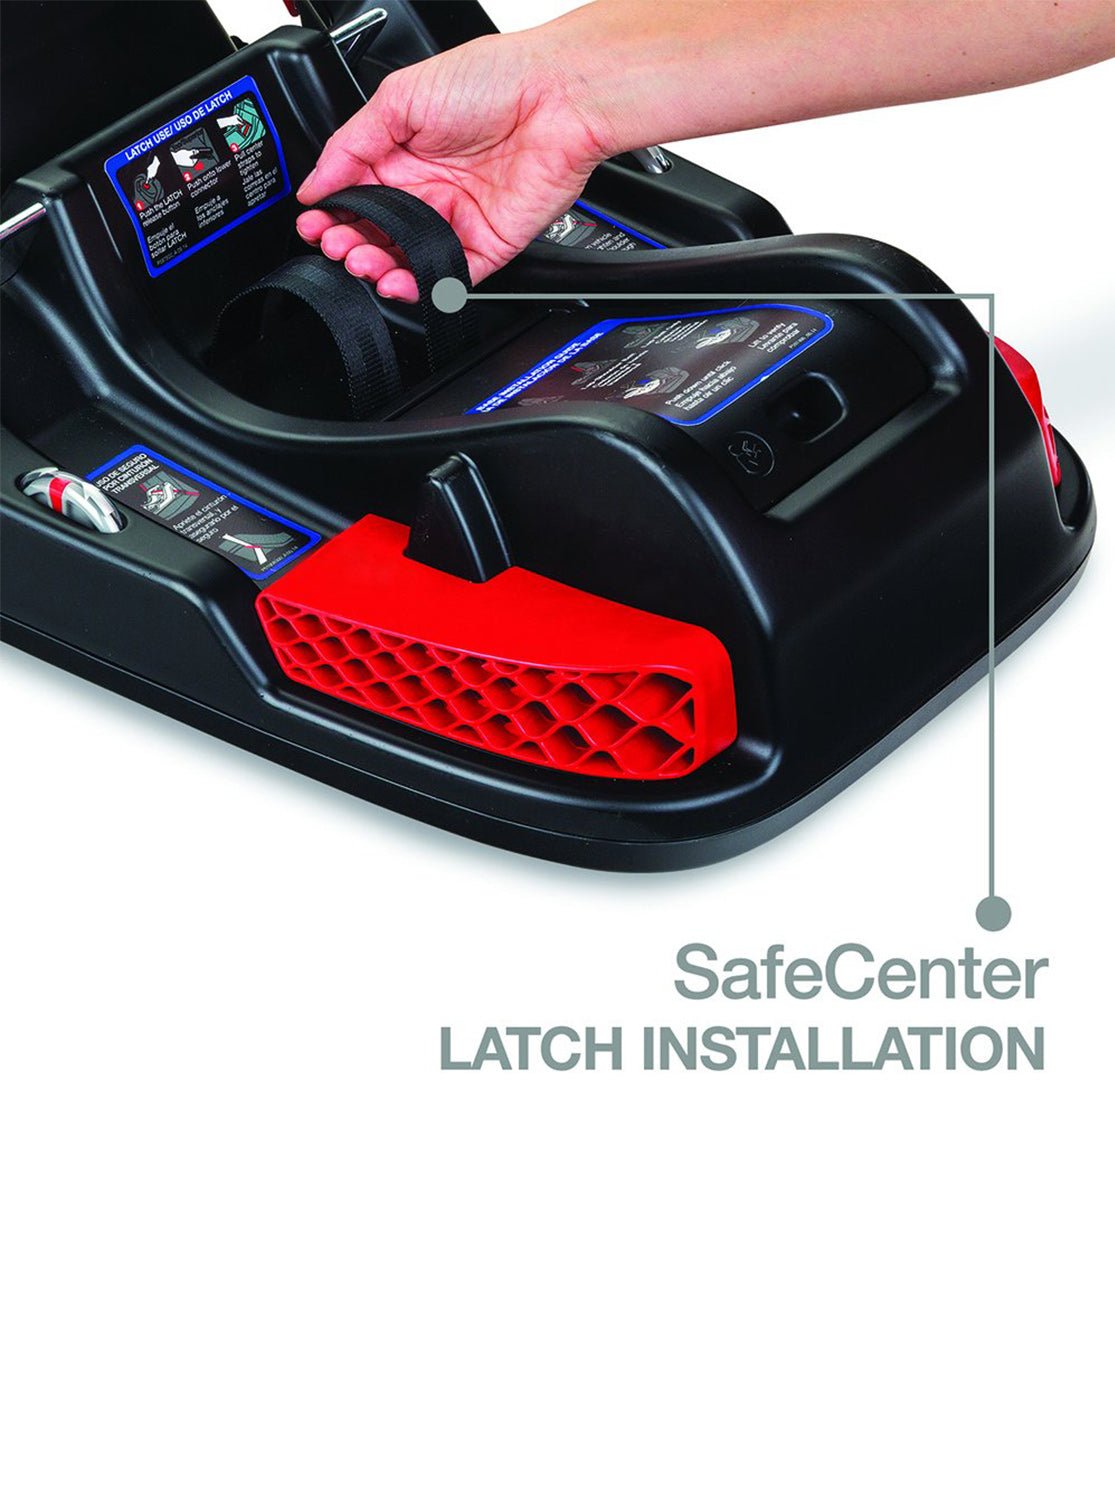 BRITAX Infant Car Seat Base with SafeCenter LATCH Installation - ANB Baby -$100 - $300